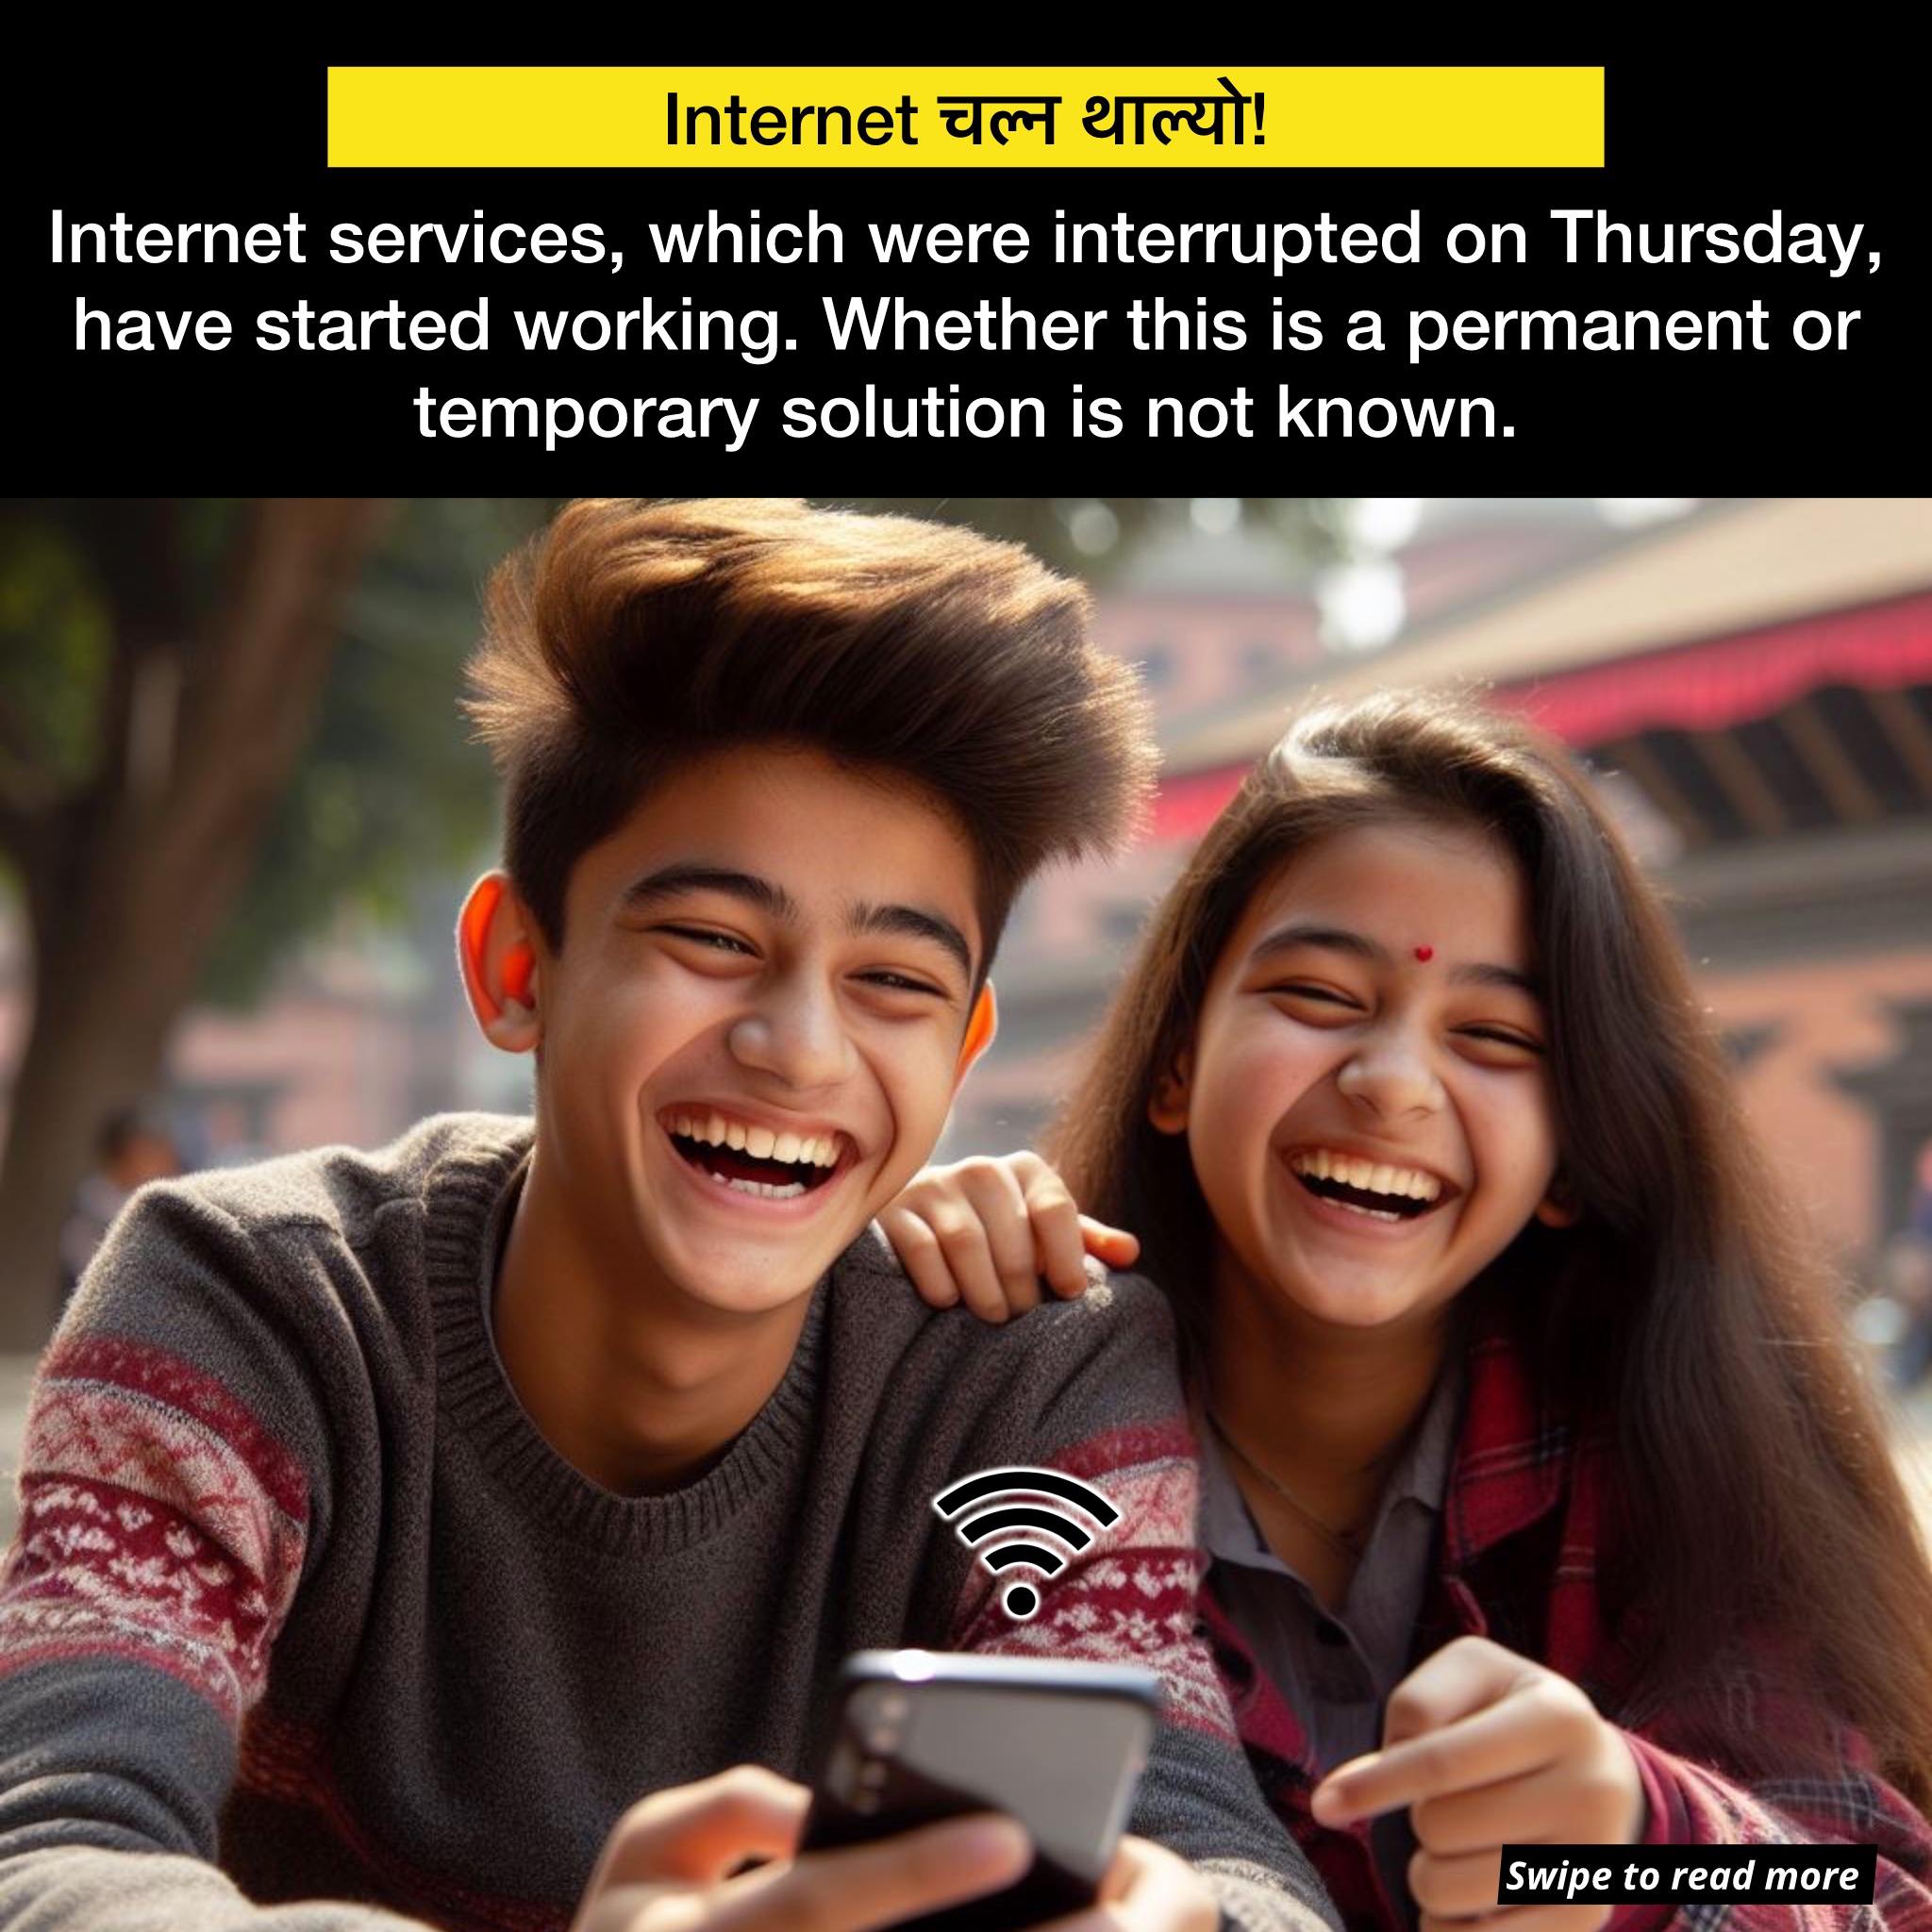 Internet Services Interrupted on Thursday Have Resumed; Permanent or Temporary Solution Uncertain